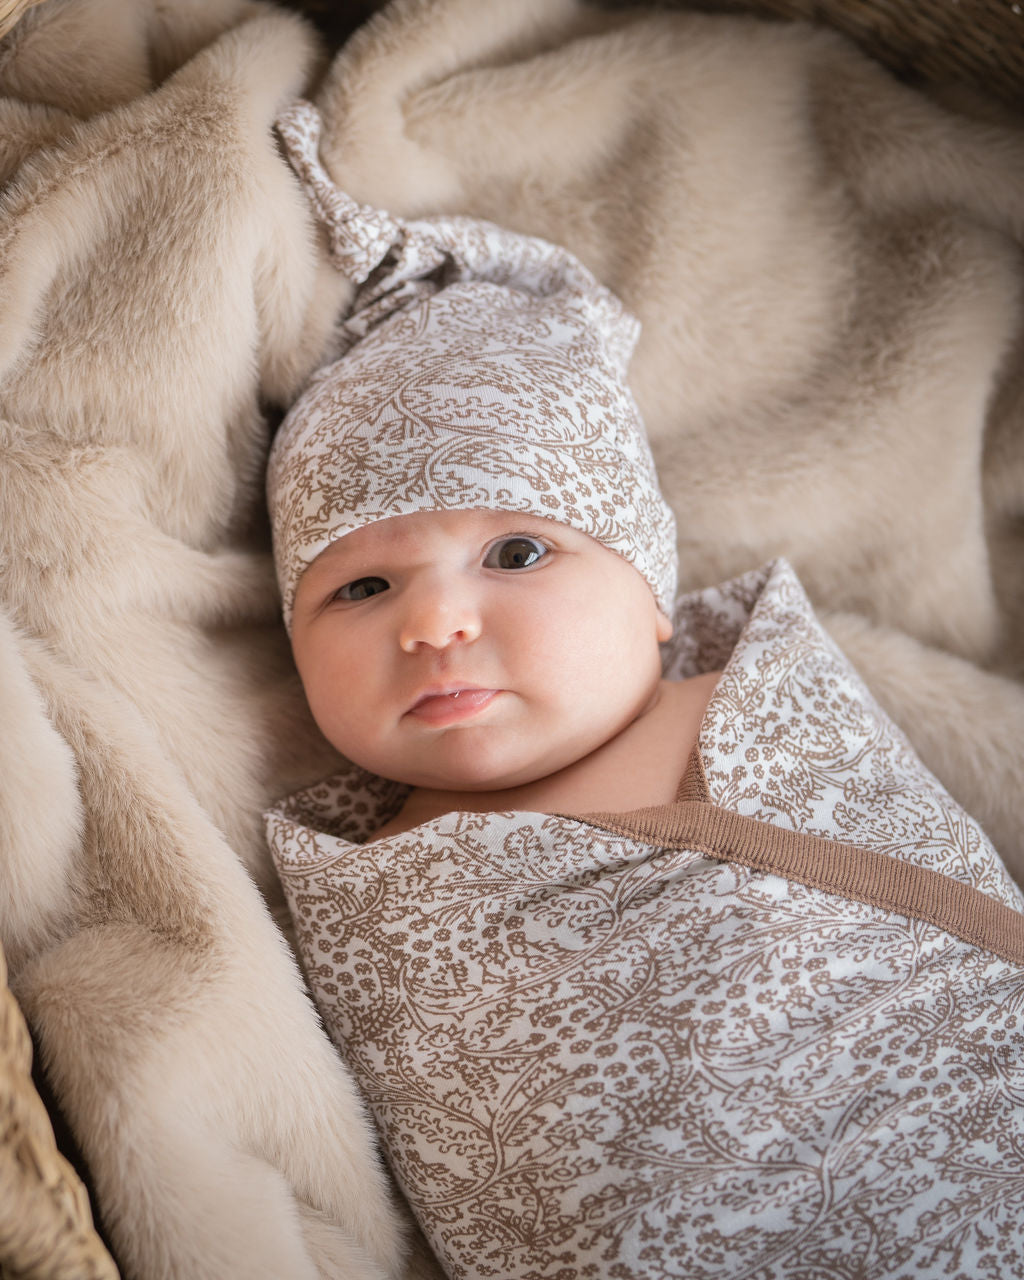 Posed Newborn Photo Sessions and Why I Quit Doing Them -